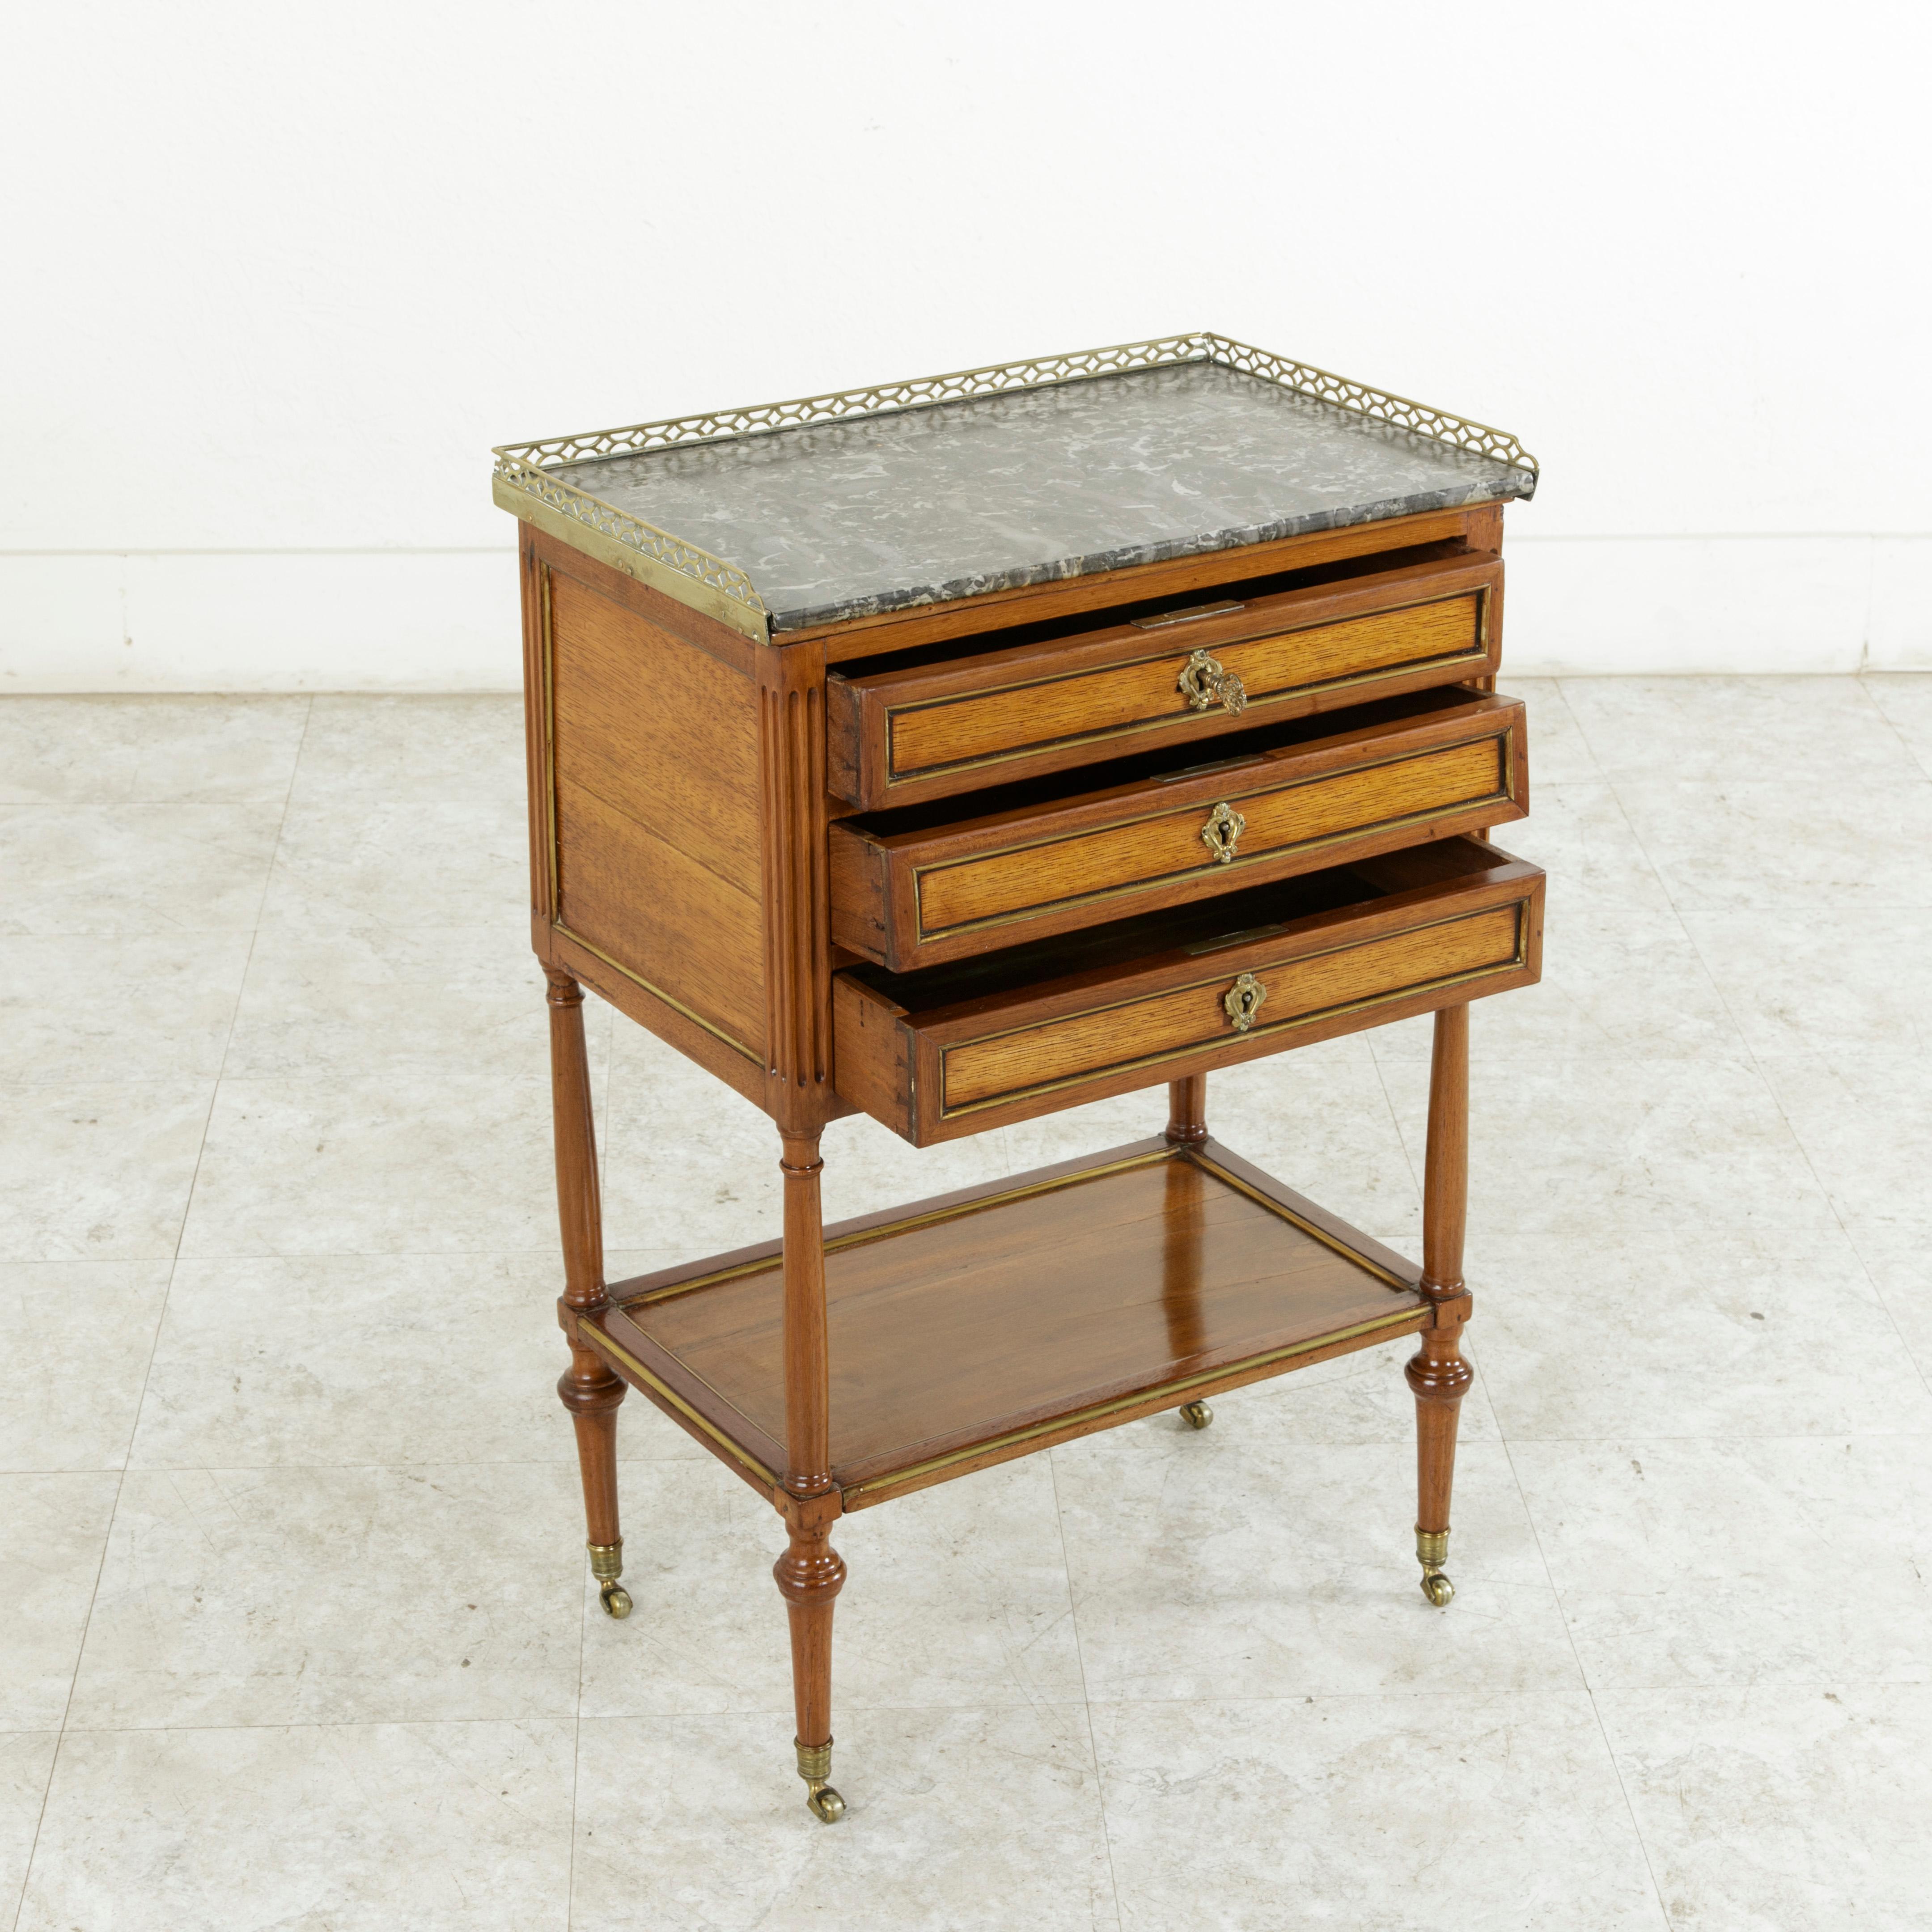 Late 18th Century French Louis XVI Period Walnut Jewelry Chest or Nightstand 7